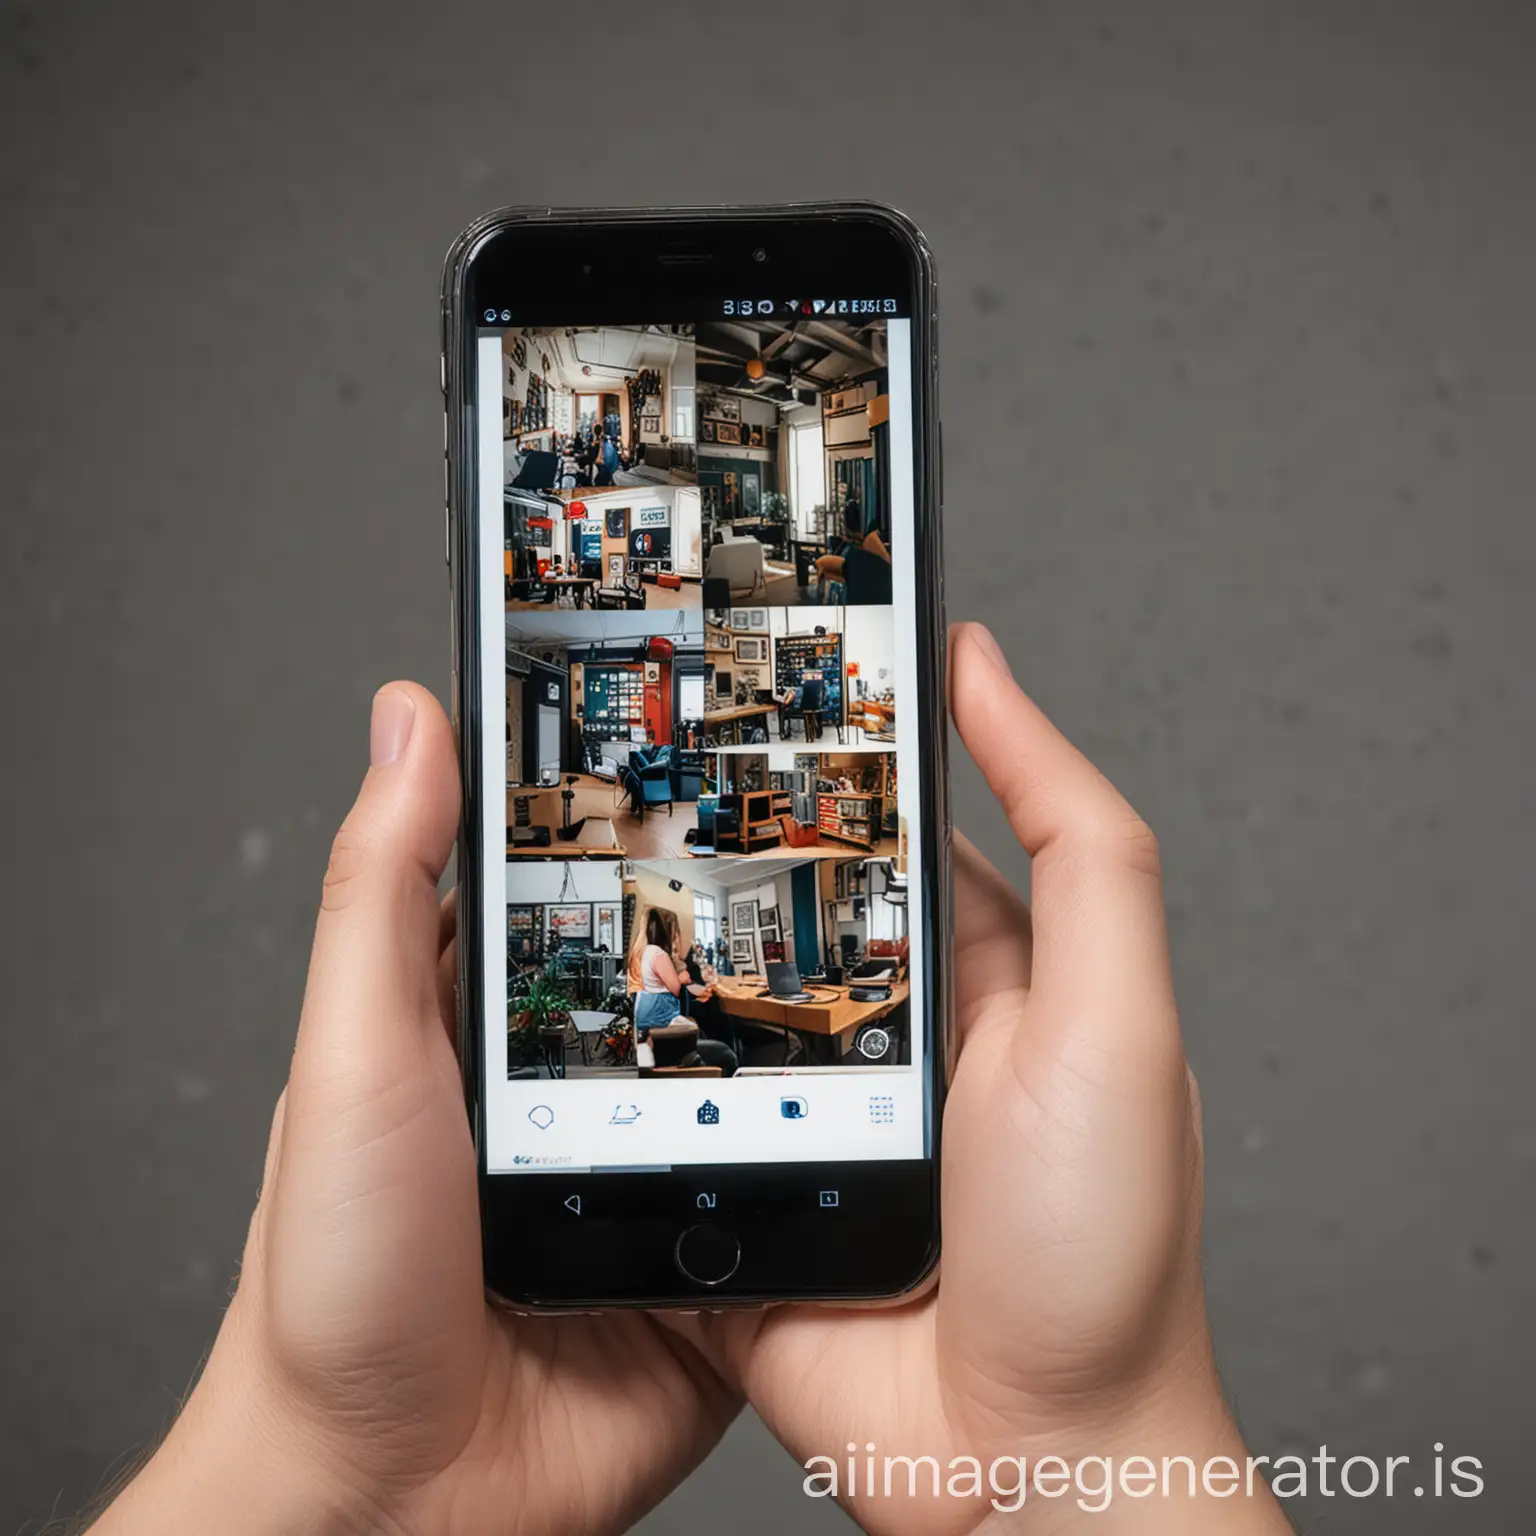 A smartphone is a versatile device combining computing power, communication tools, and a high-quality camera. With AI capabilities, it can generate images creatively, turning photos into artworks or creating unique visual compositions. It's a pocket-sized powerhouse for both productivity and creative expression.